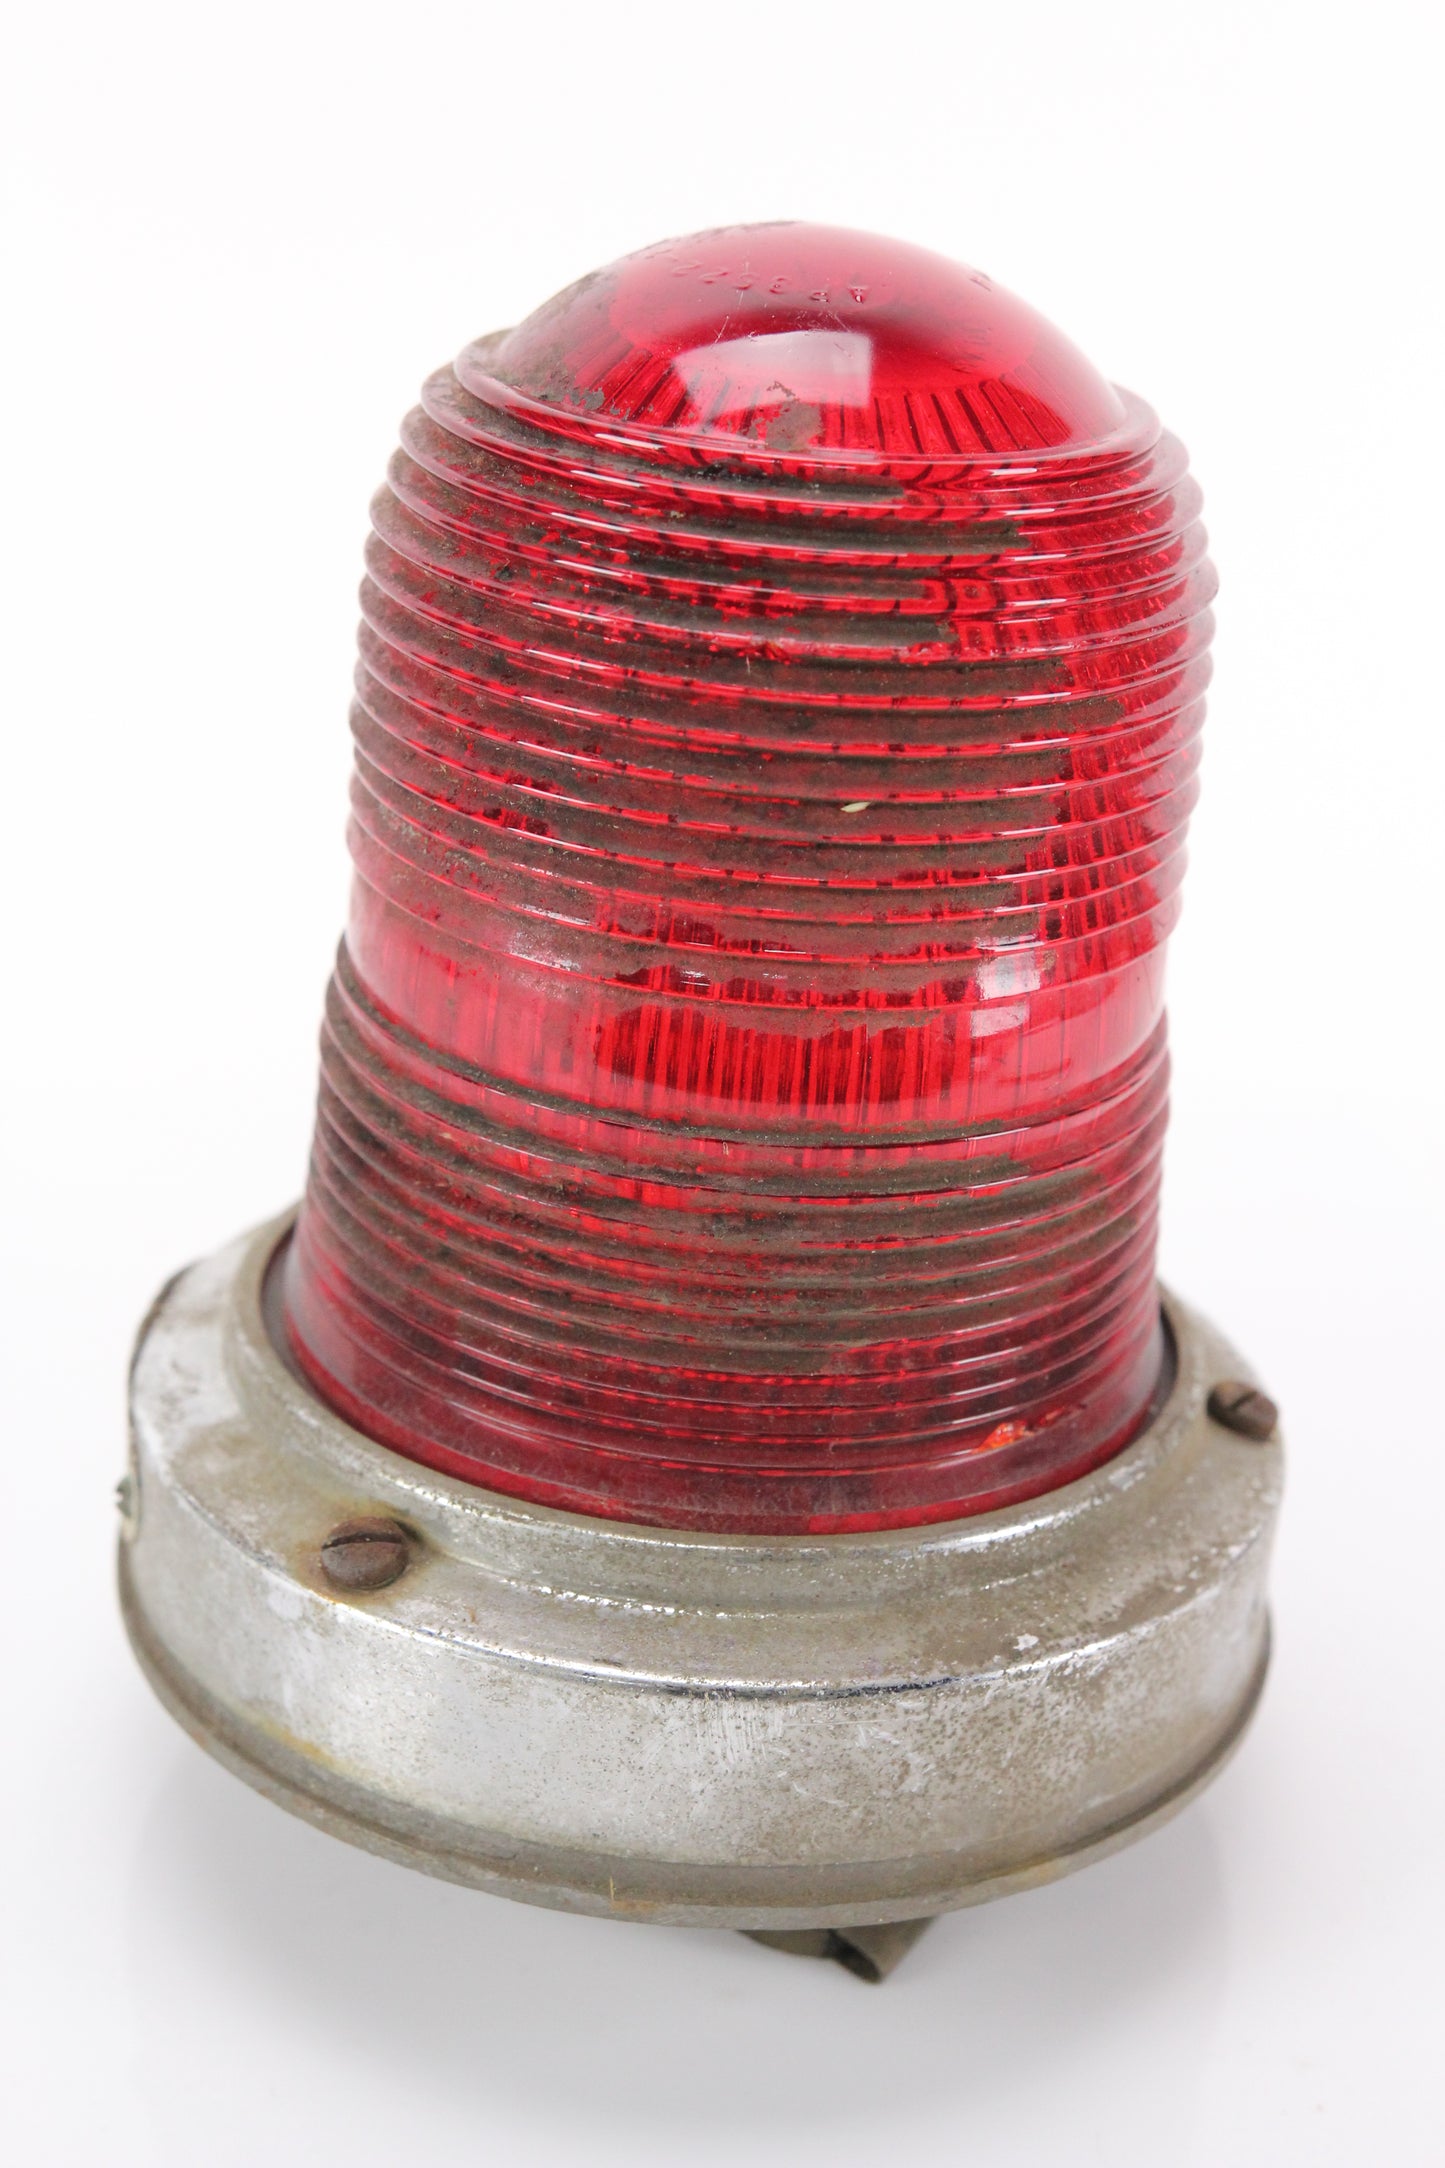 Antique Emergency Ambulance Light with Red Glass Lens